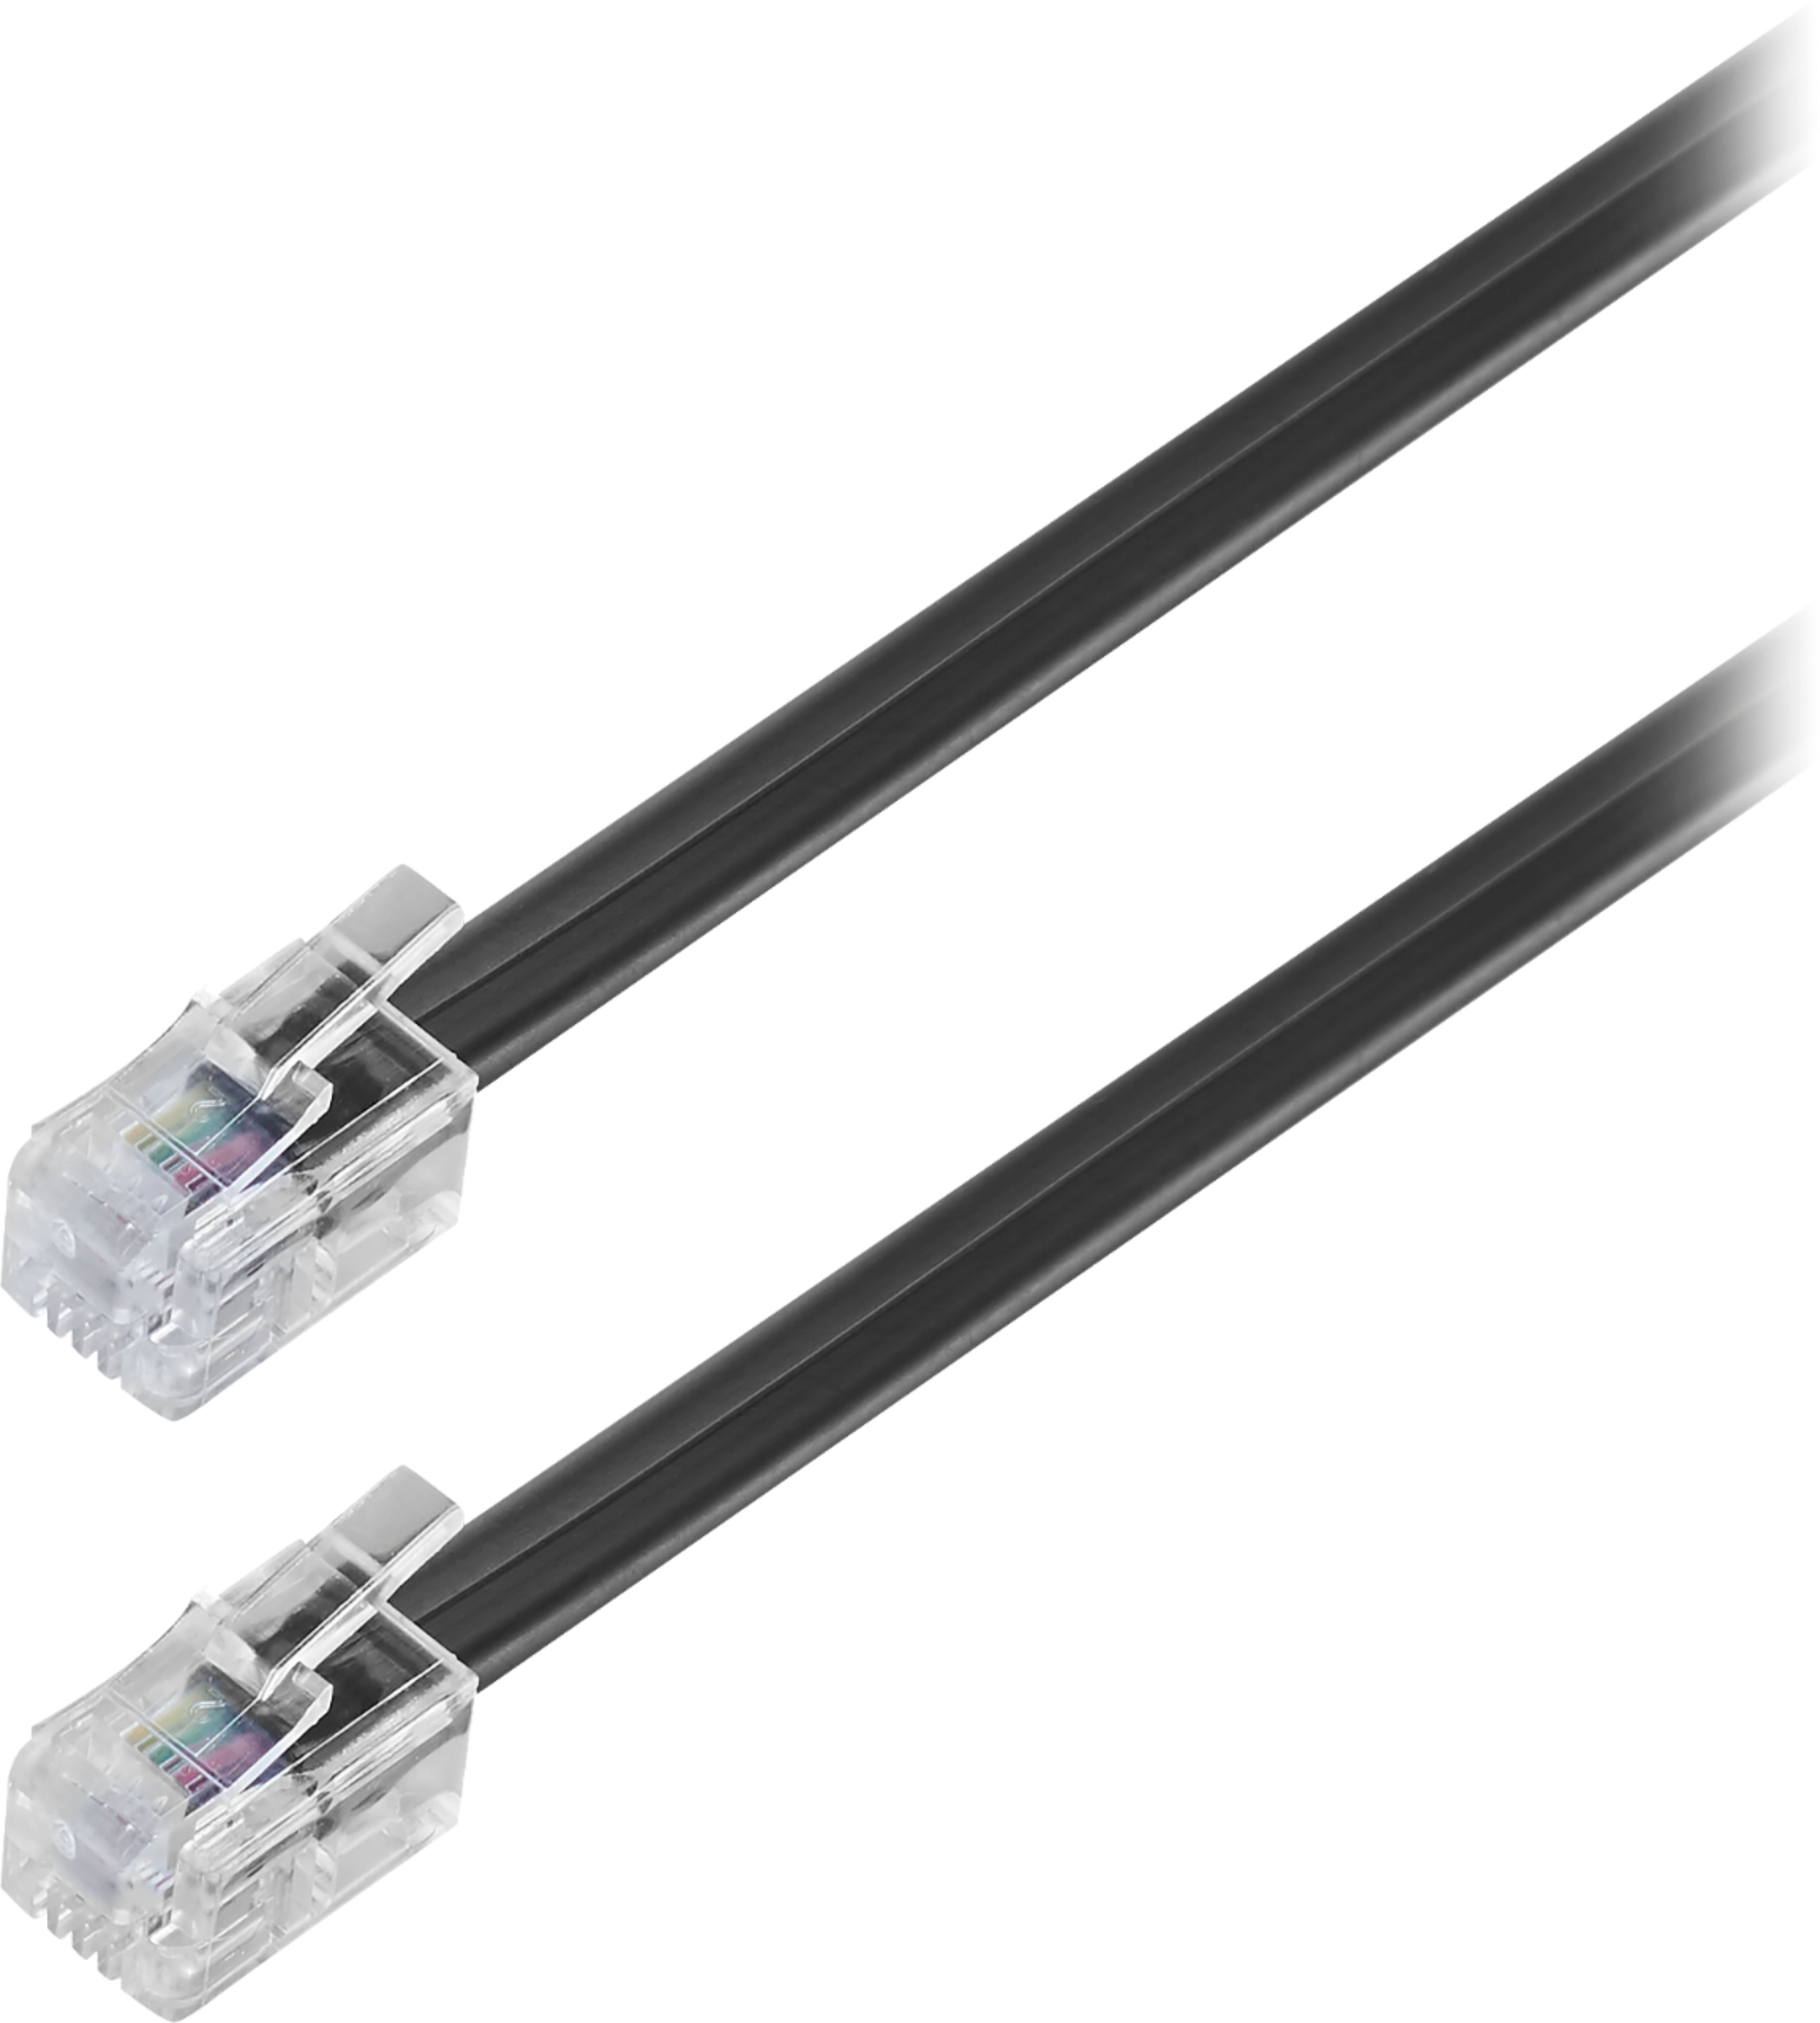 Angle View: Insignia™ - 25' Phone Cable - Black